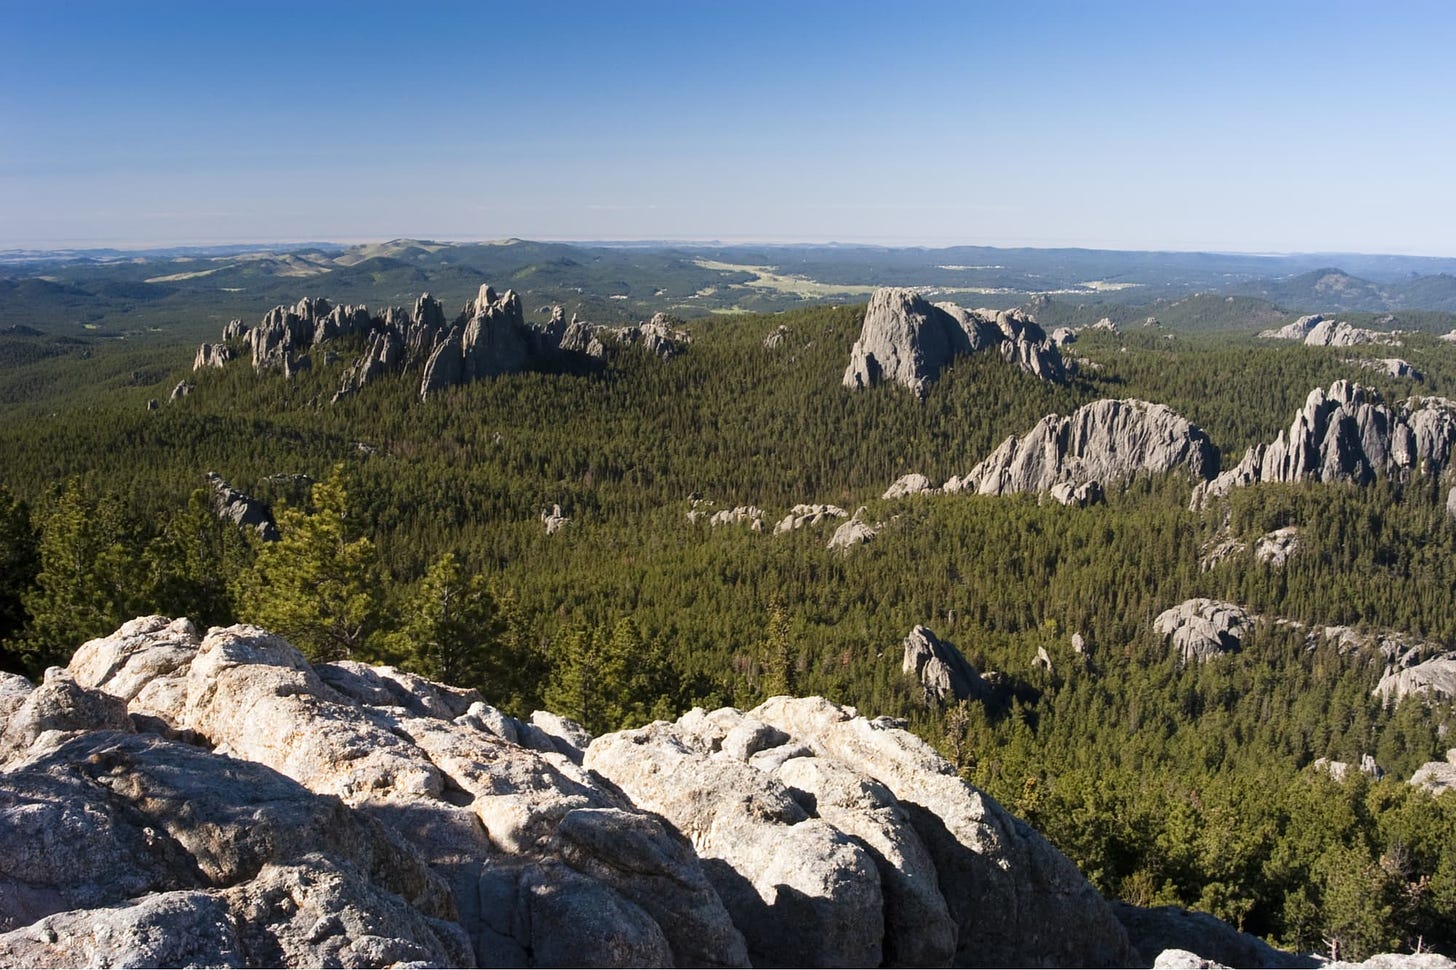 Black Hills Camping: 11 Campgrounds in This Unique South Dakota Forest